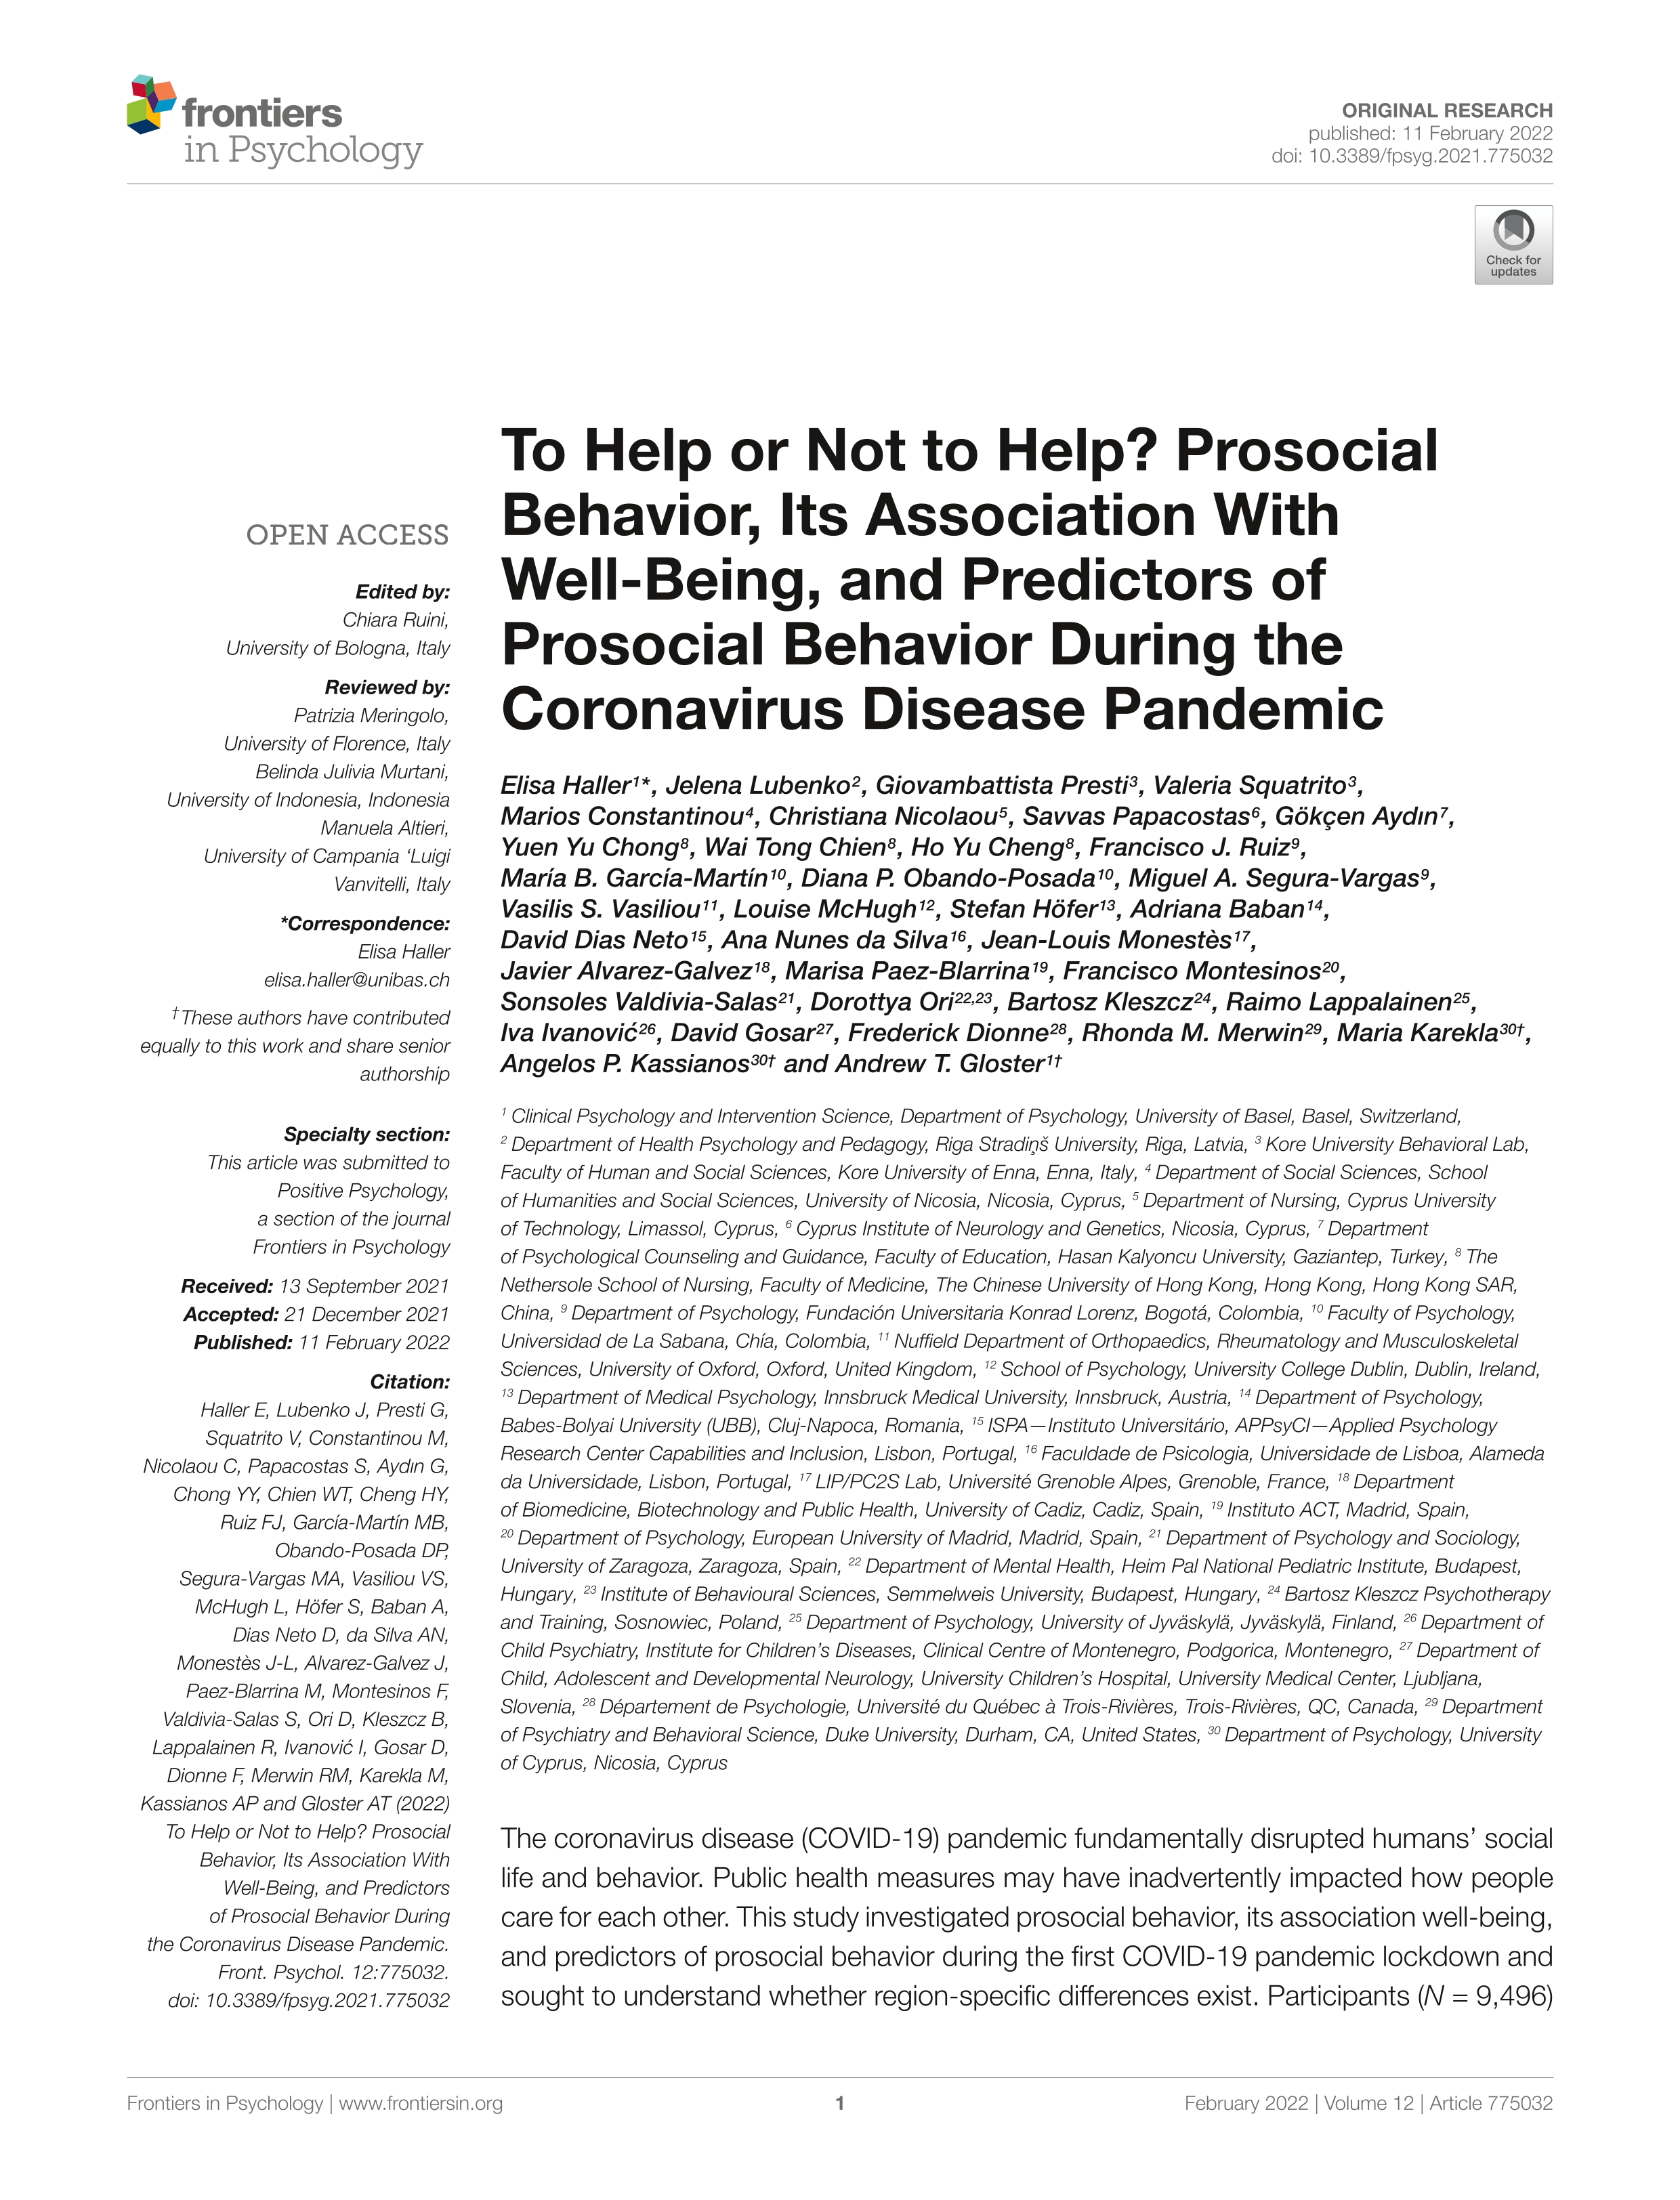 To help or not to help? Prosocial behavior, its association with well-being, and predictors of prosocial behavior during the Coronavirus disease pandemic